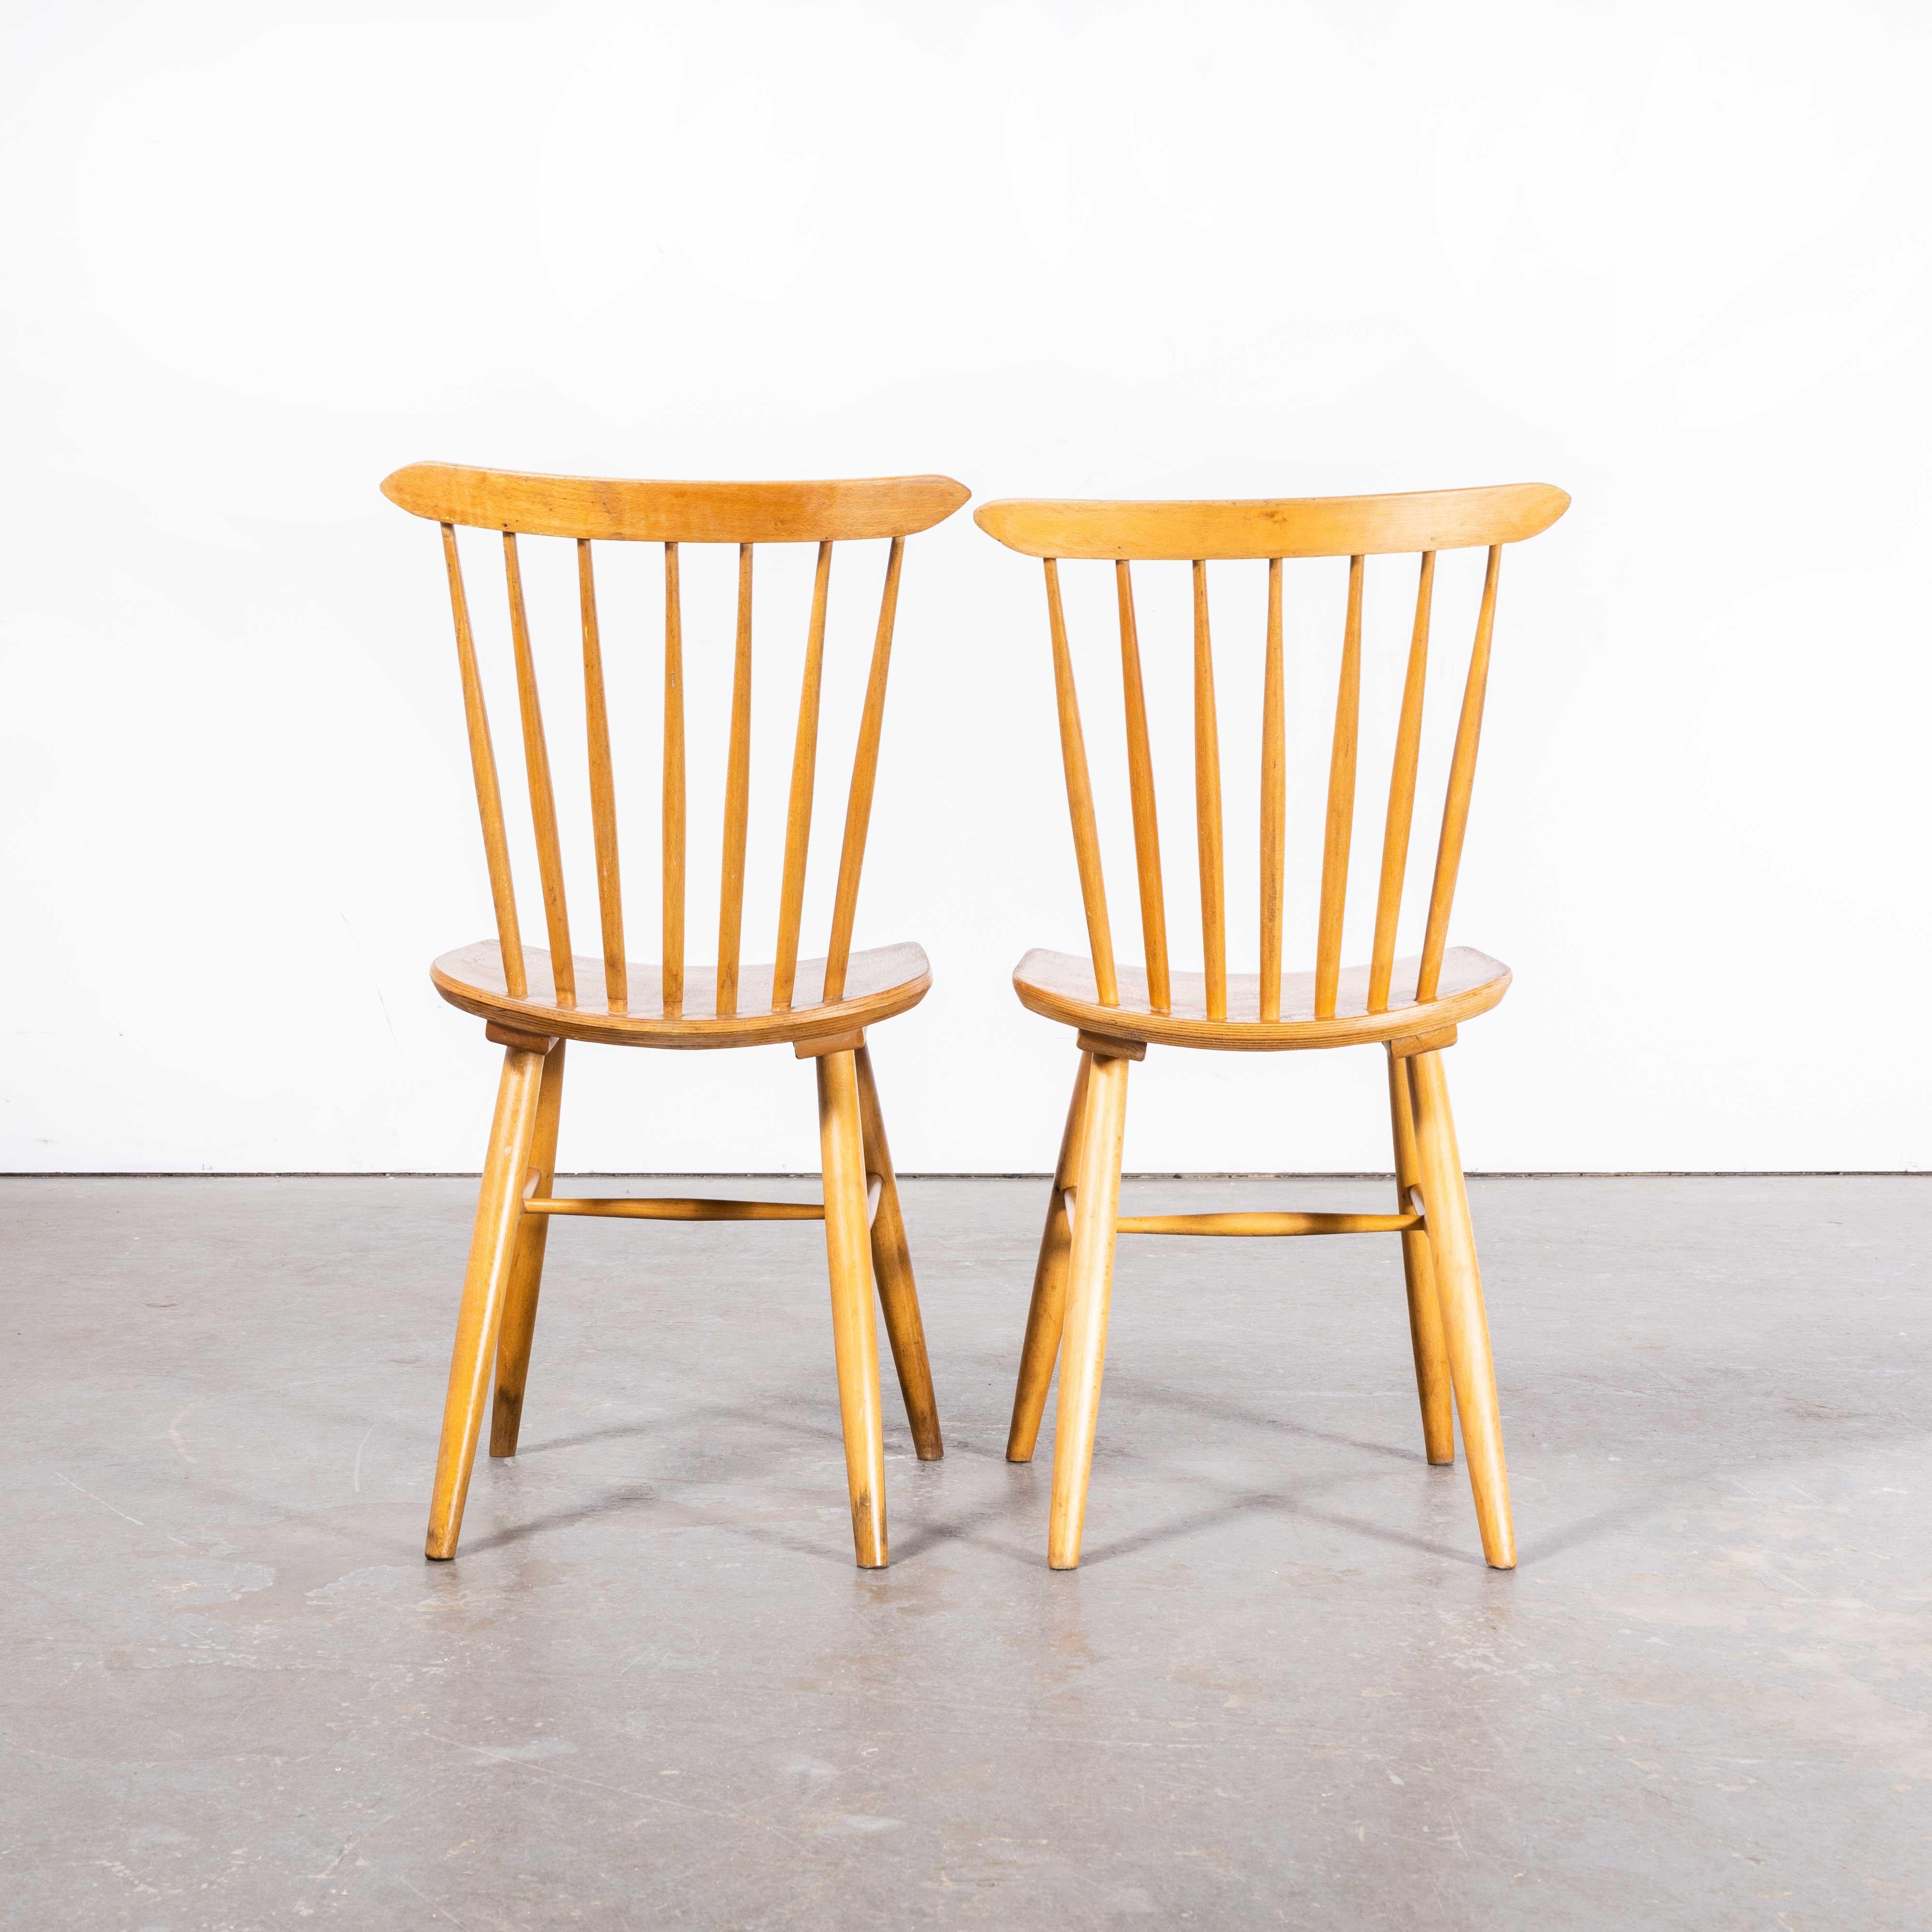 Czech 1950 Honey Oak Stickback Chairs, Saddle Seat, by Ton, Pair For Sale